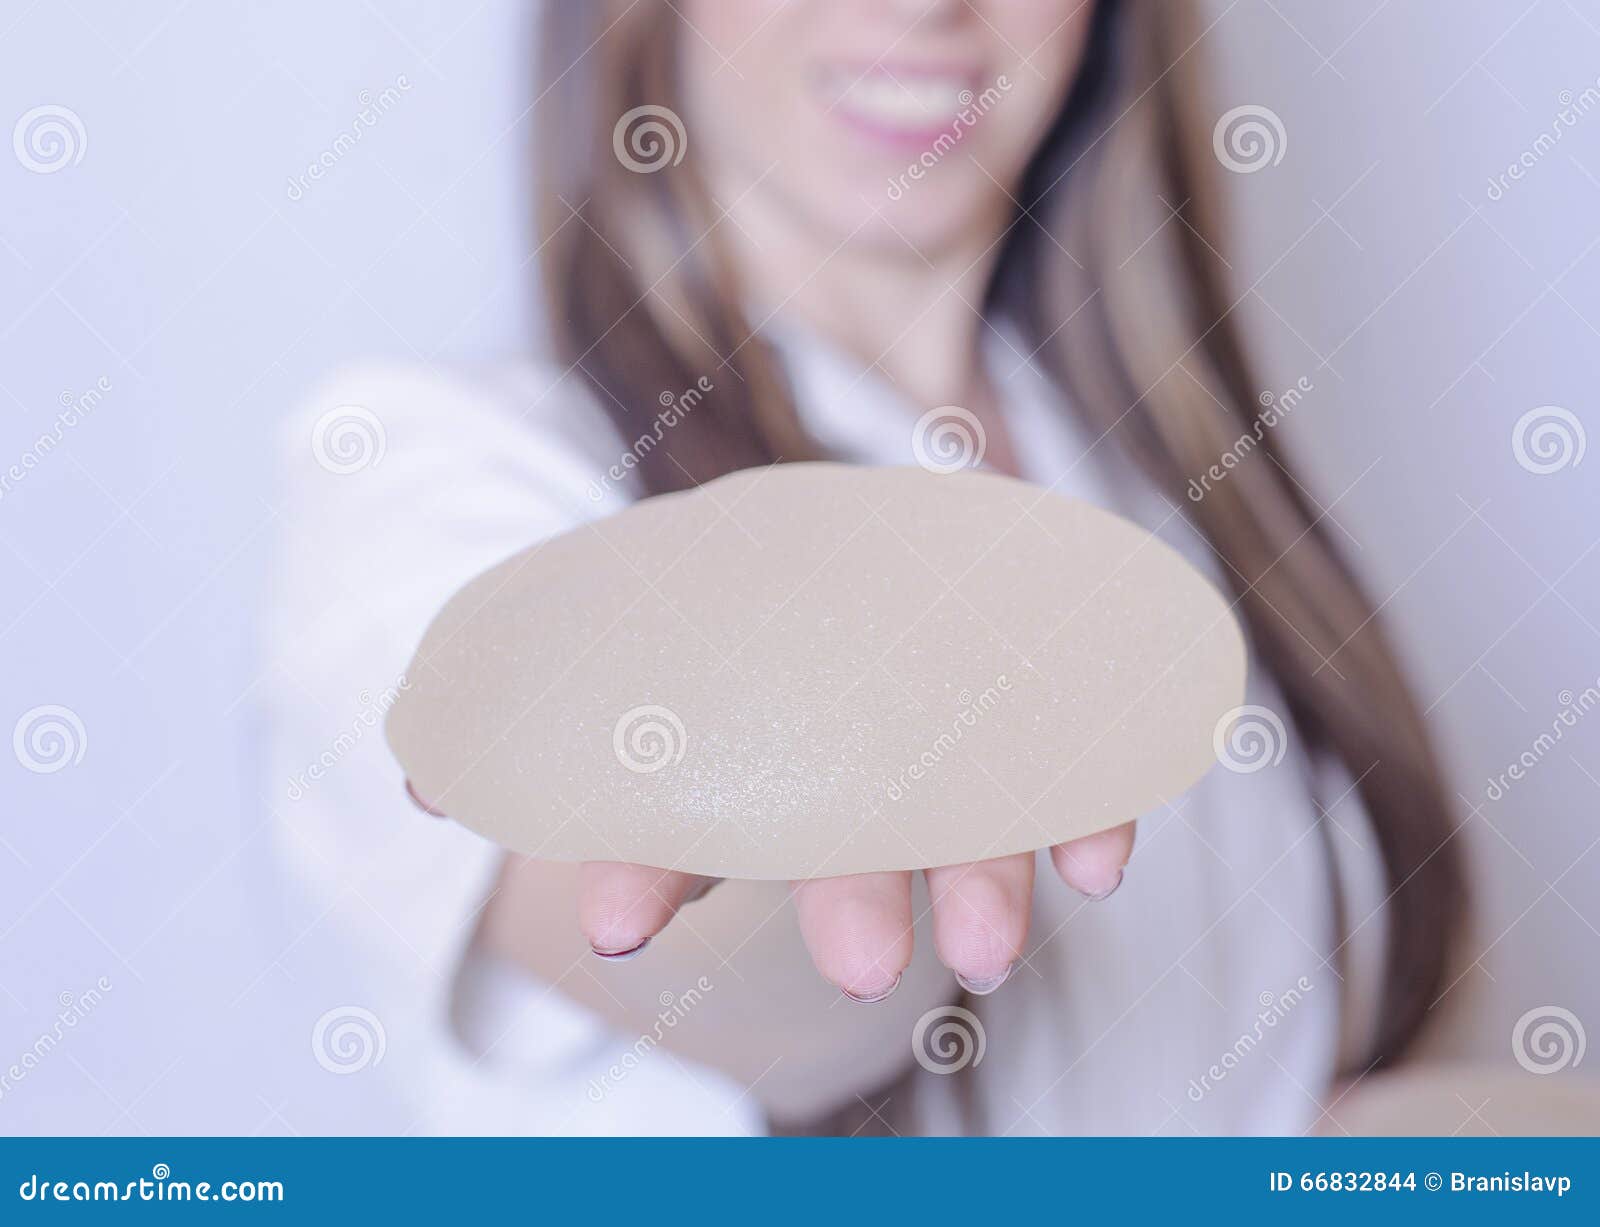 Woman breast implant cross section. - Royalty free image #15523515